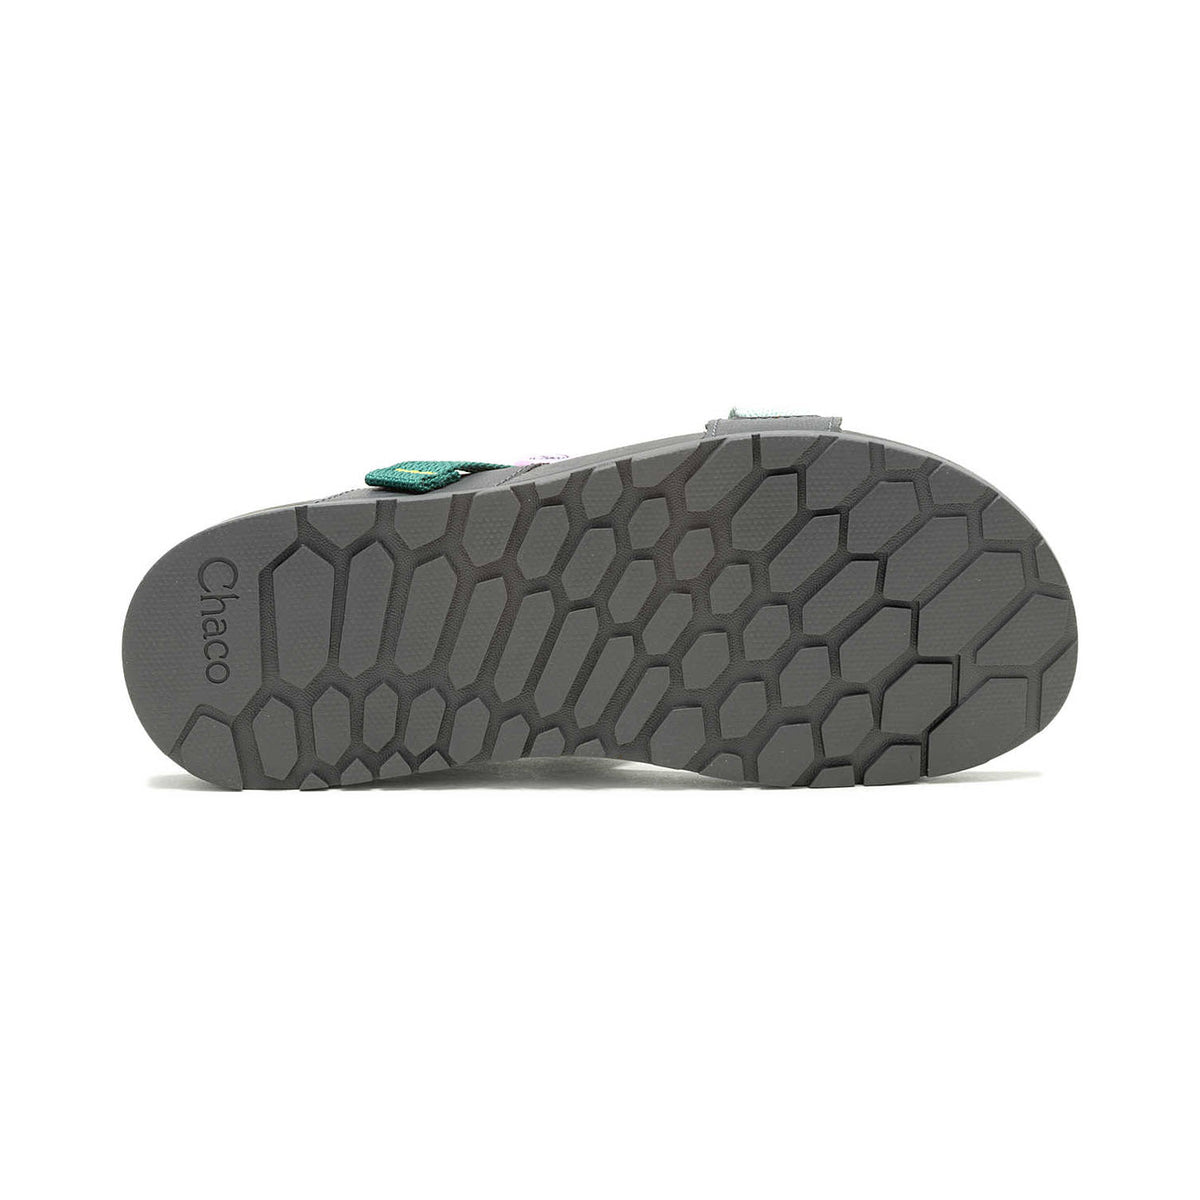 Bottom view of a Chaco Lowdown Sandal Surf Spray - Womens sport sandal showcasing its hexagon-patterned sole and a small green logo on the heel strap.